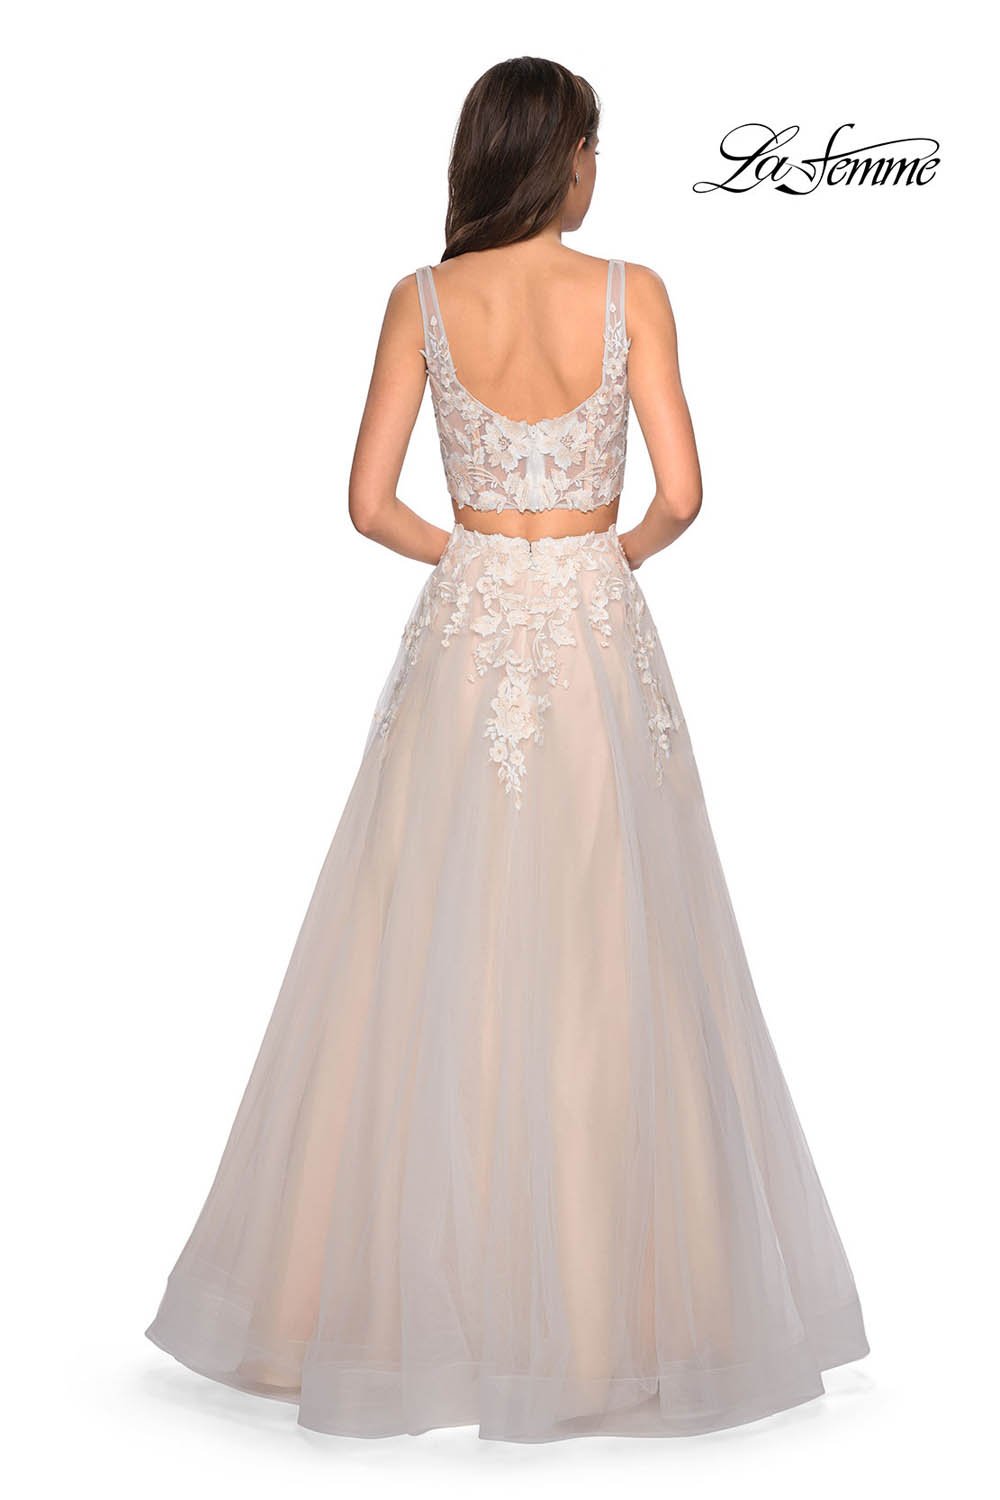 La Femme 27635 dress images in these colors: Ivory Nude.